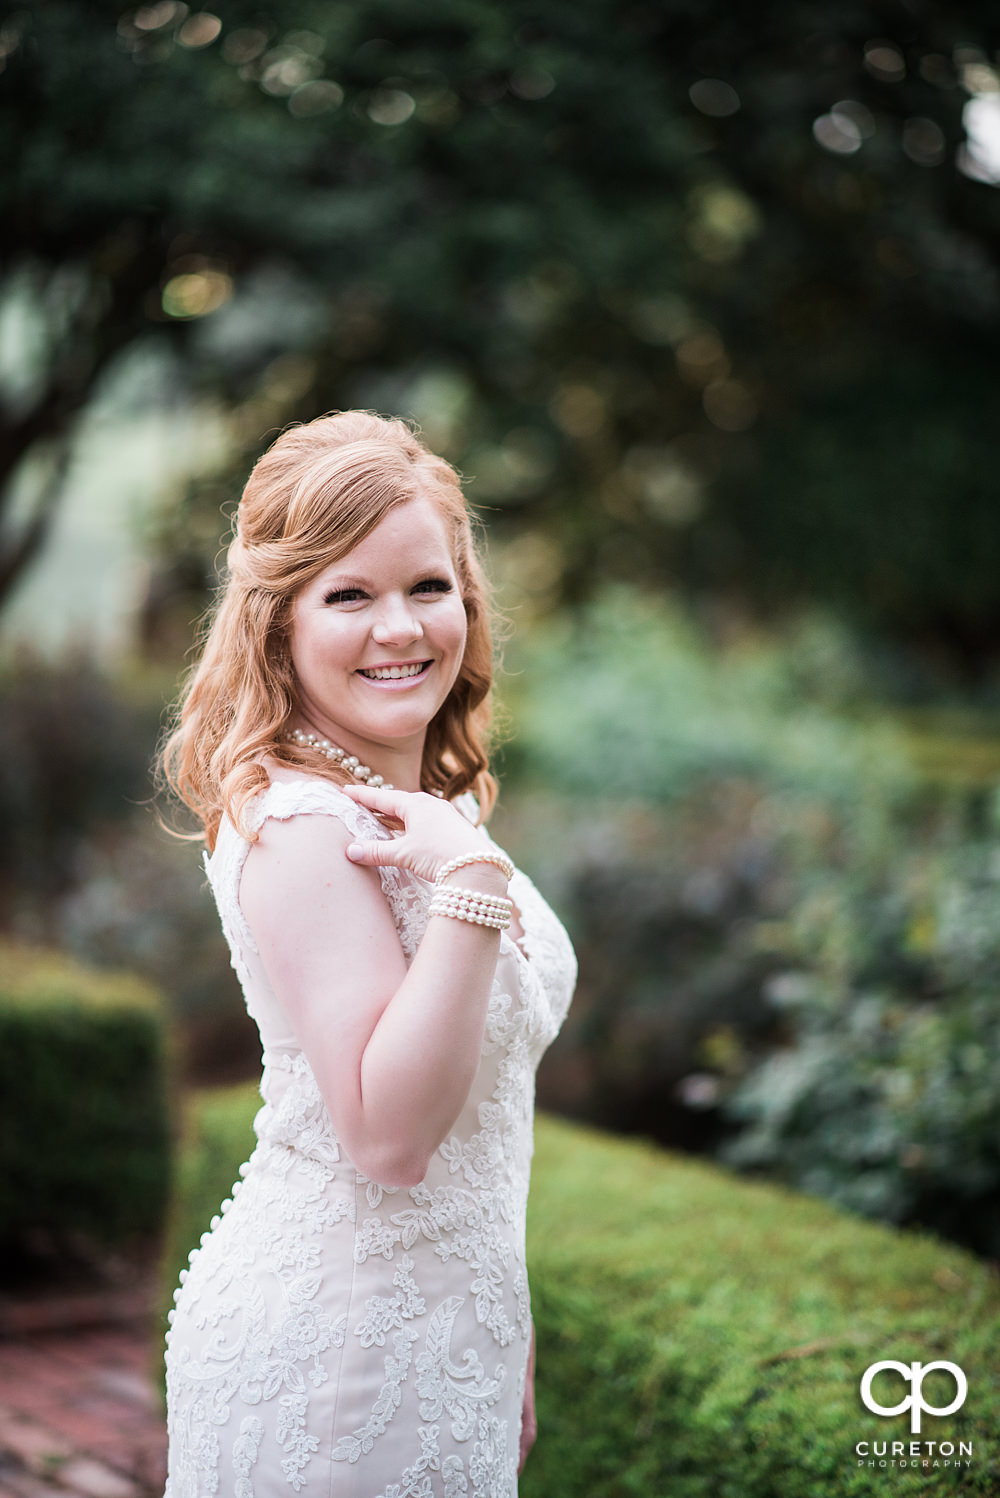 Bride at golden hour in the rose garden at Furman.